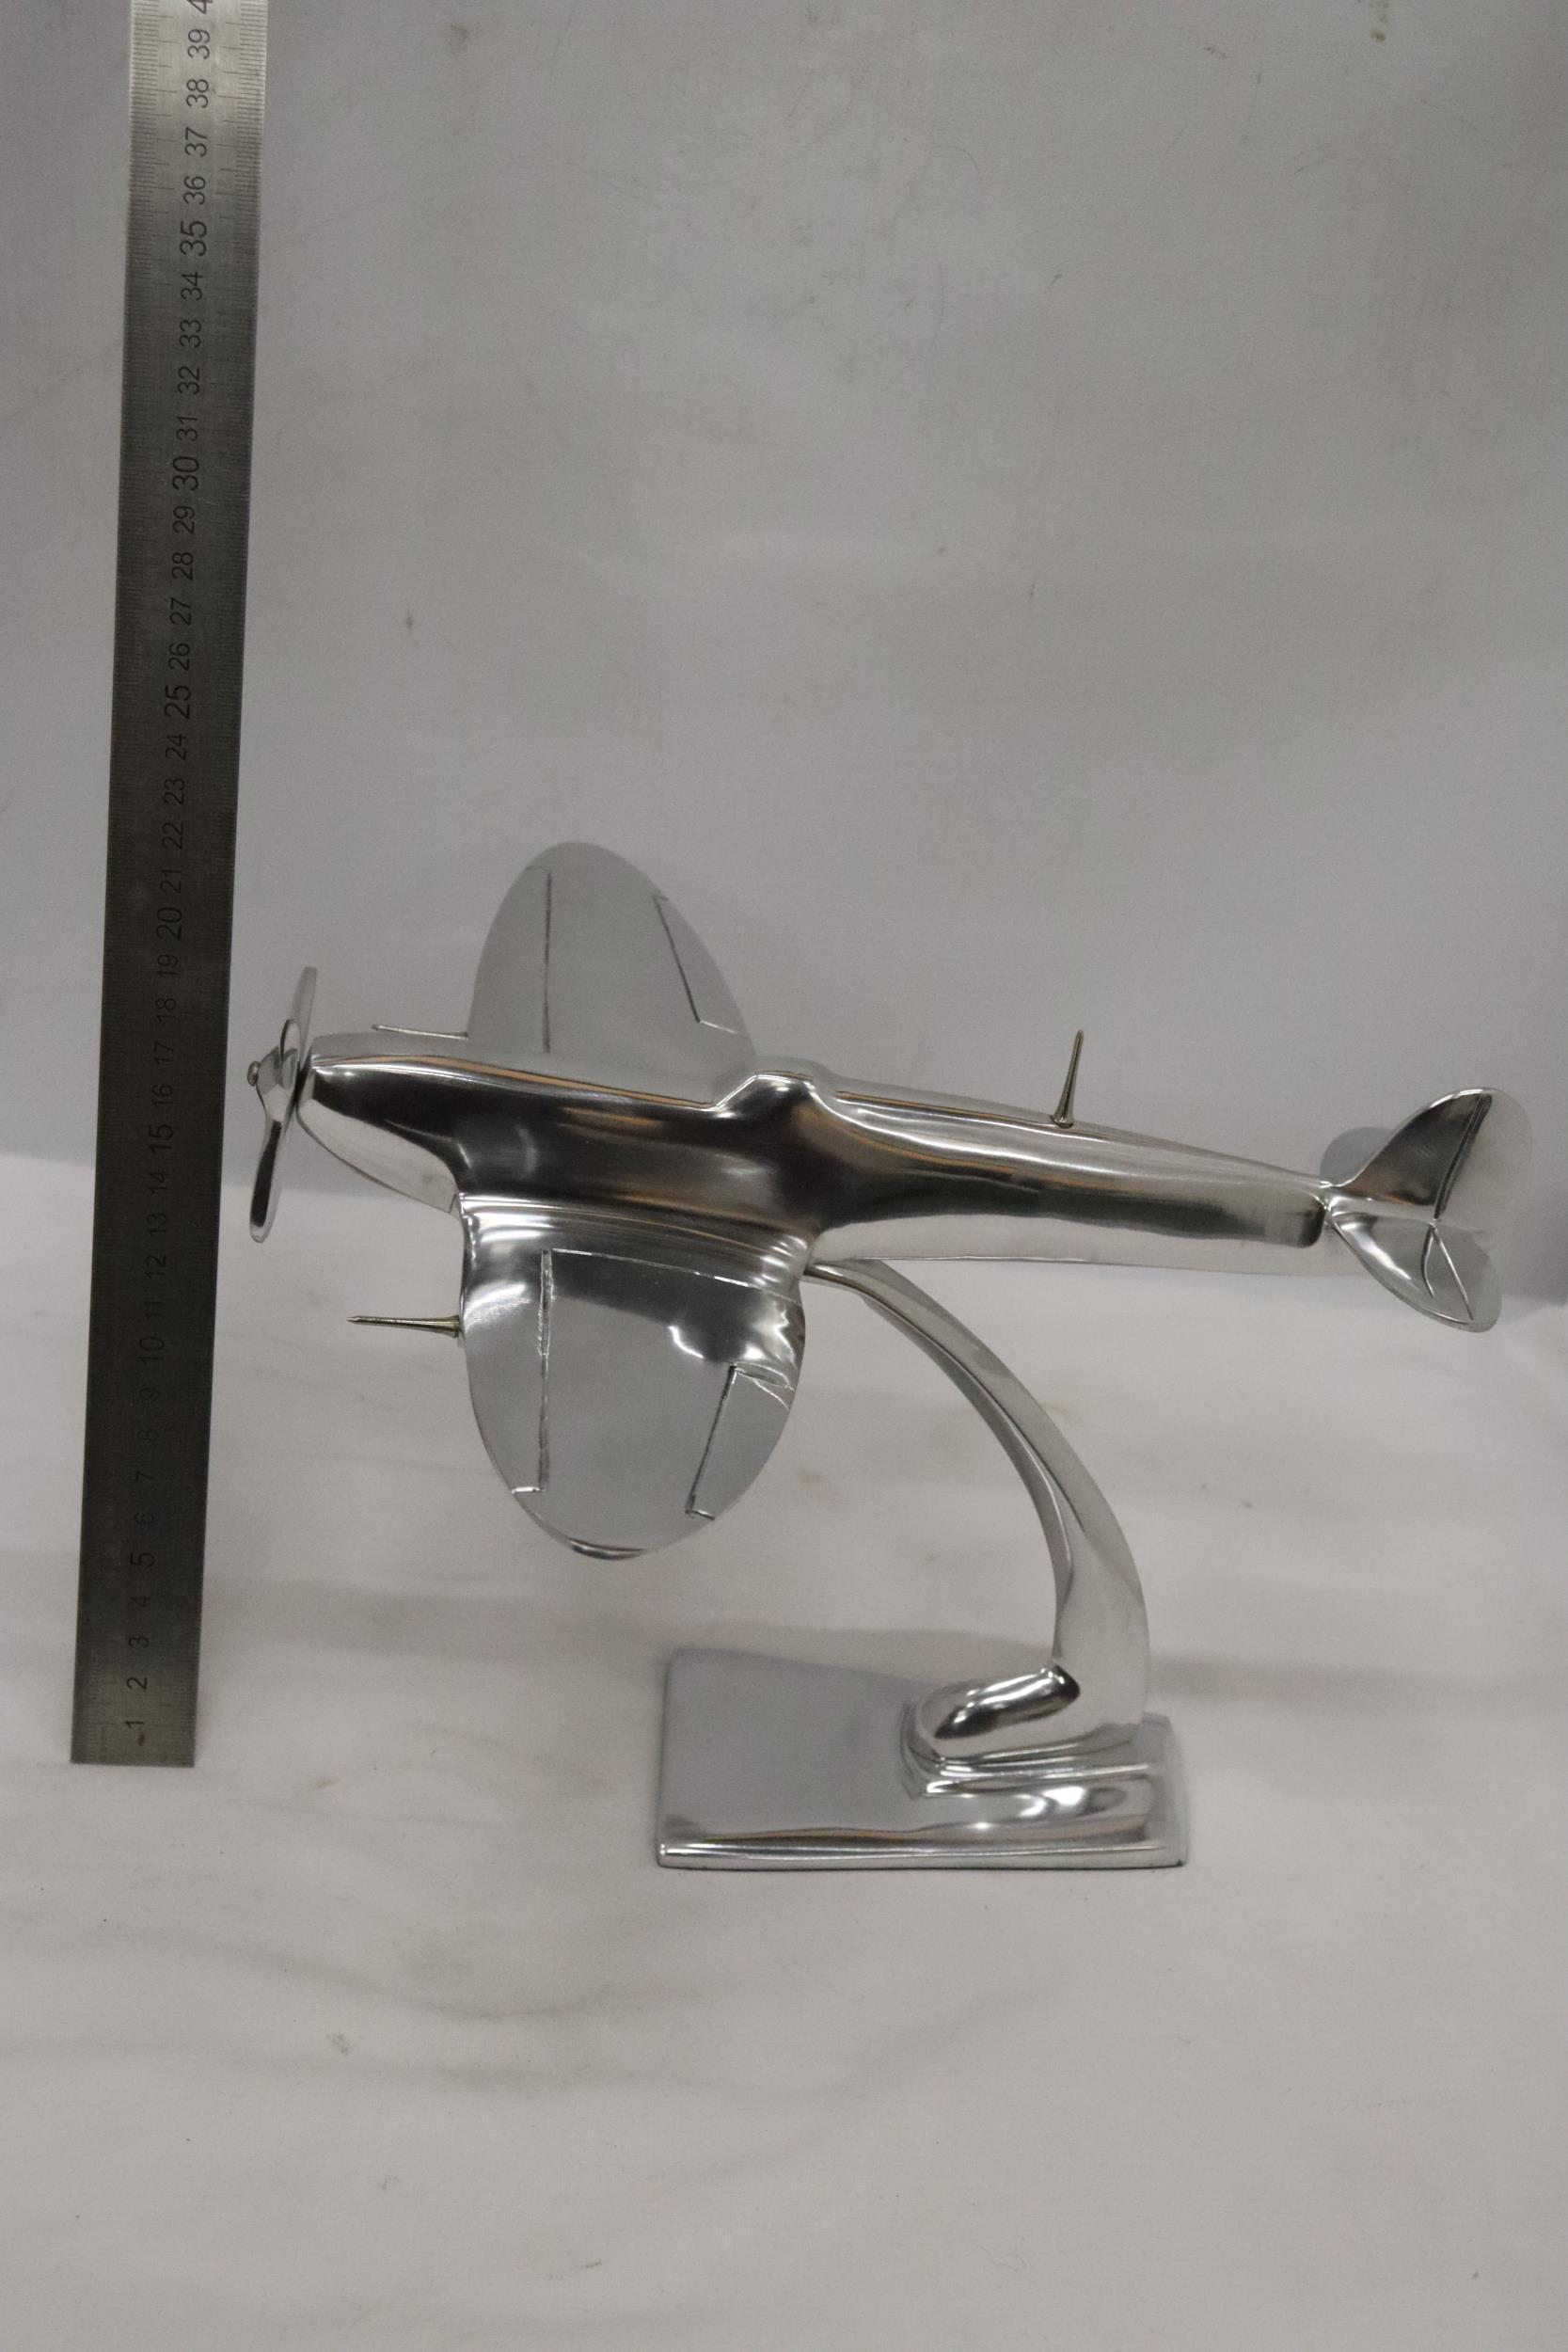 A LARGE CHROME SPITFIRE ON A STAND - Image 6 of 6